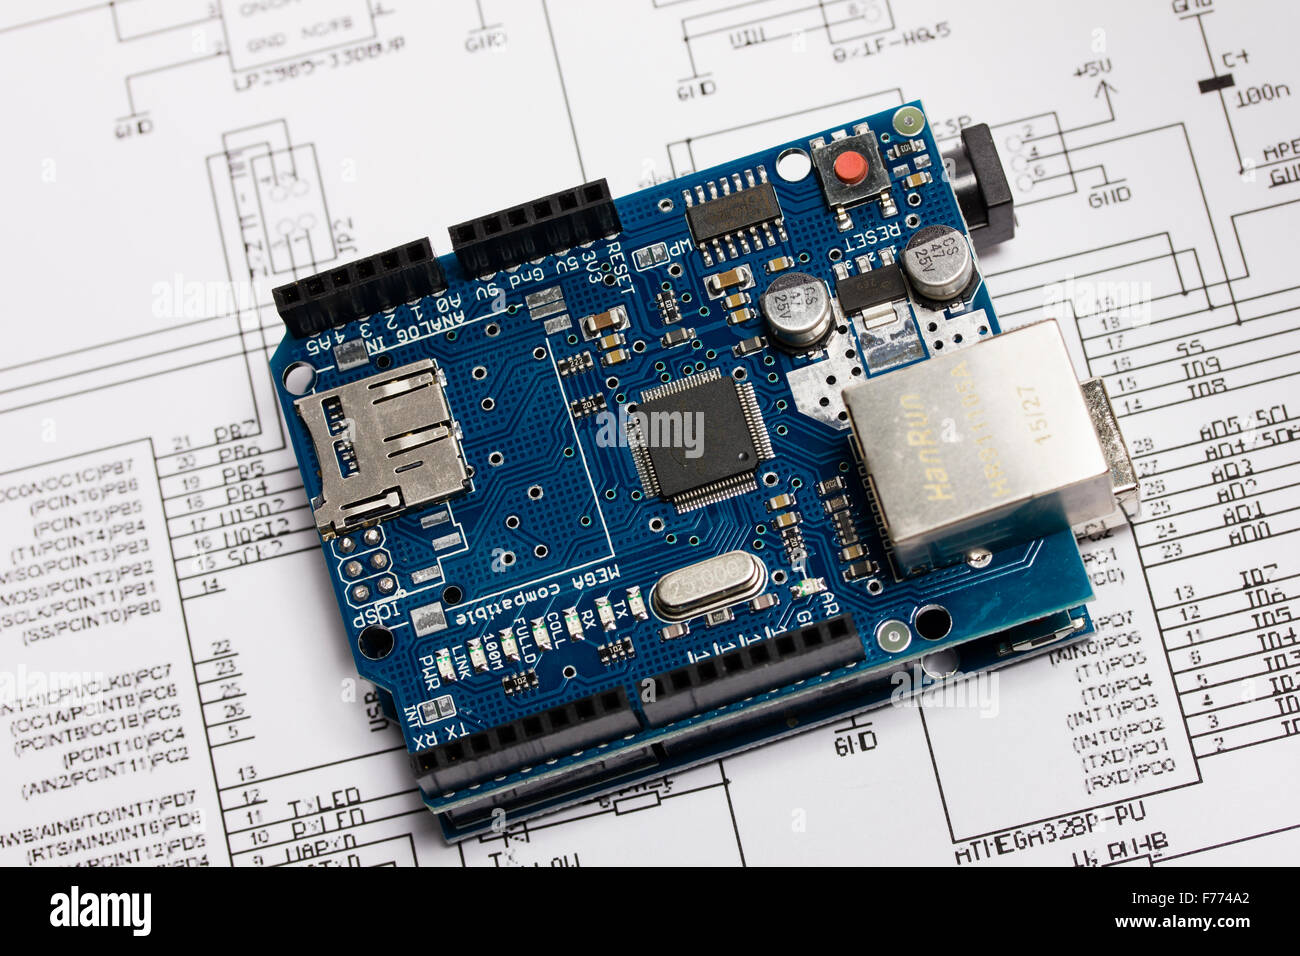 Arduino Uno microcontroller board with Ethernet shield Stock Photo